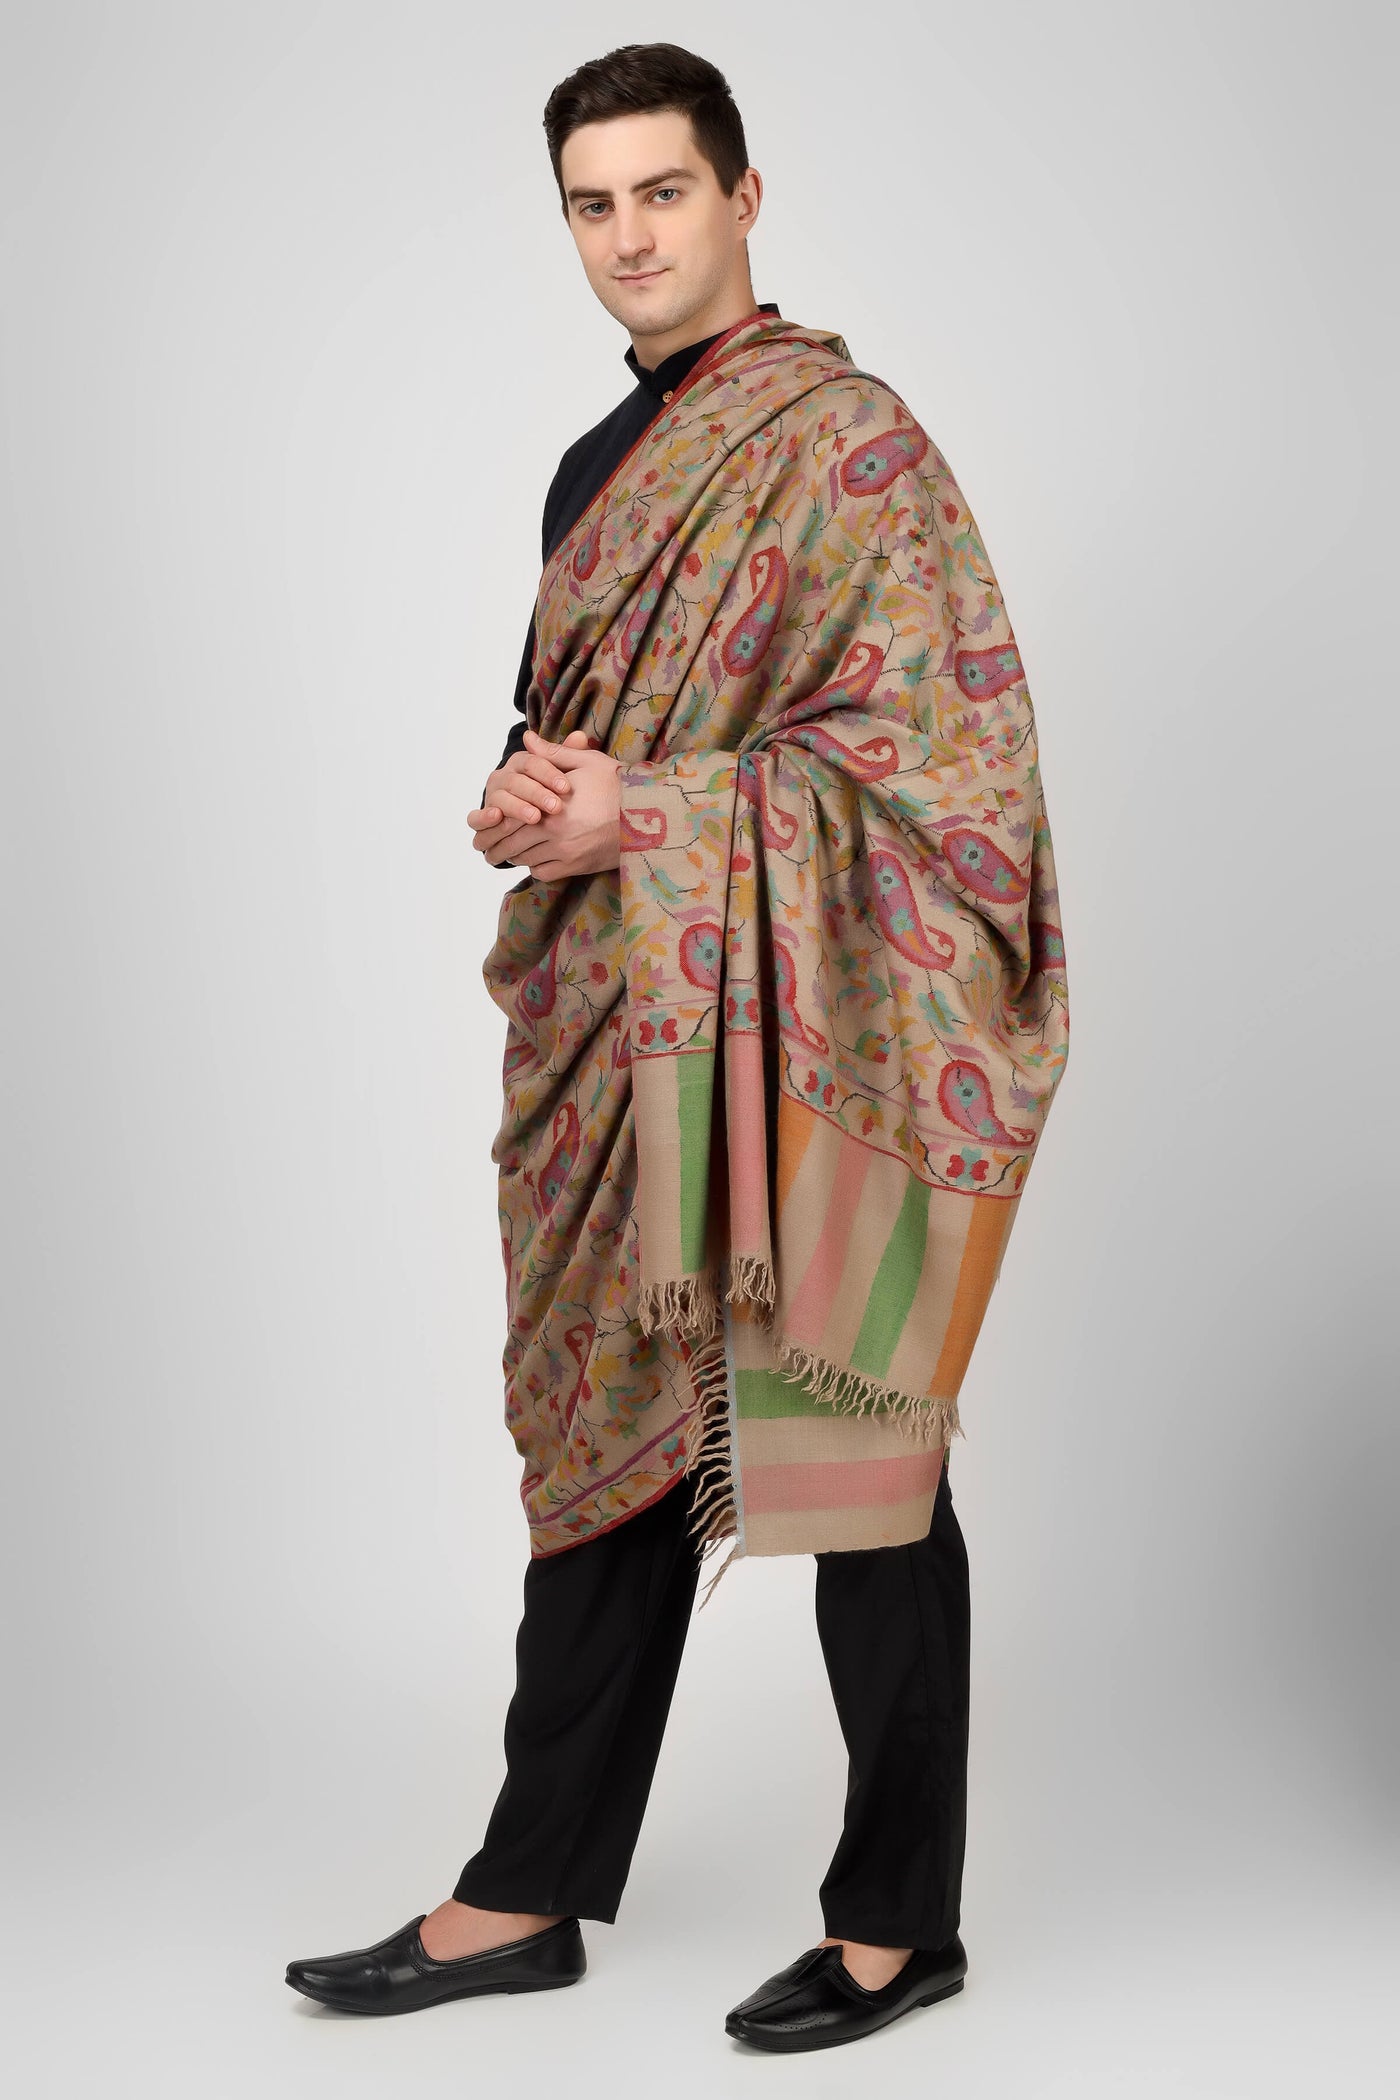  "KANI SHAWL - The Ravishing Shade of Natural (Khudrang) Plays Home to the Dancing Florals and Motifs in All the Colors of Nature, Skilled in the Same Splendid Kani Weave, Available online  - CANADA - USA - GERMANY - QATAR - AUSTRALIA - INDIA - FRANCE - DUBAI - LONDON  - ITALY."